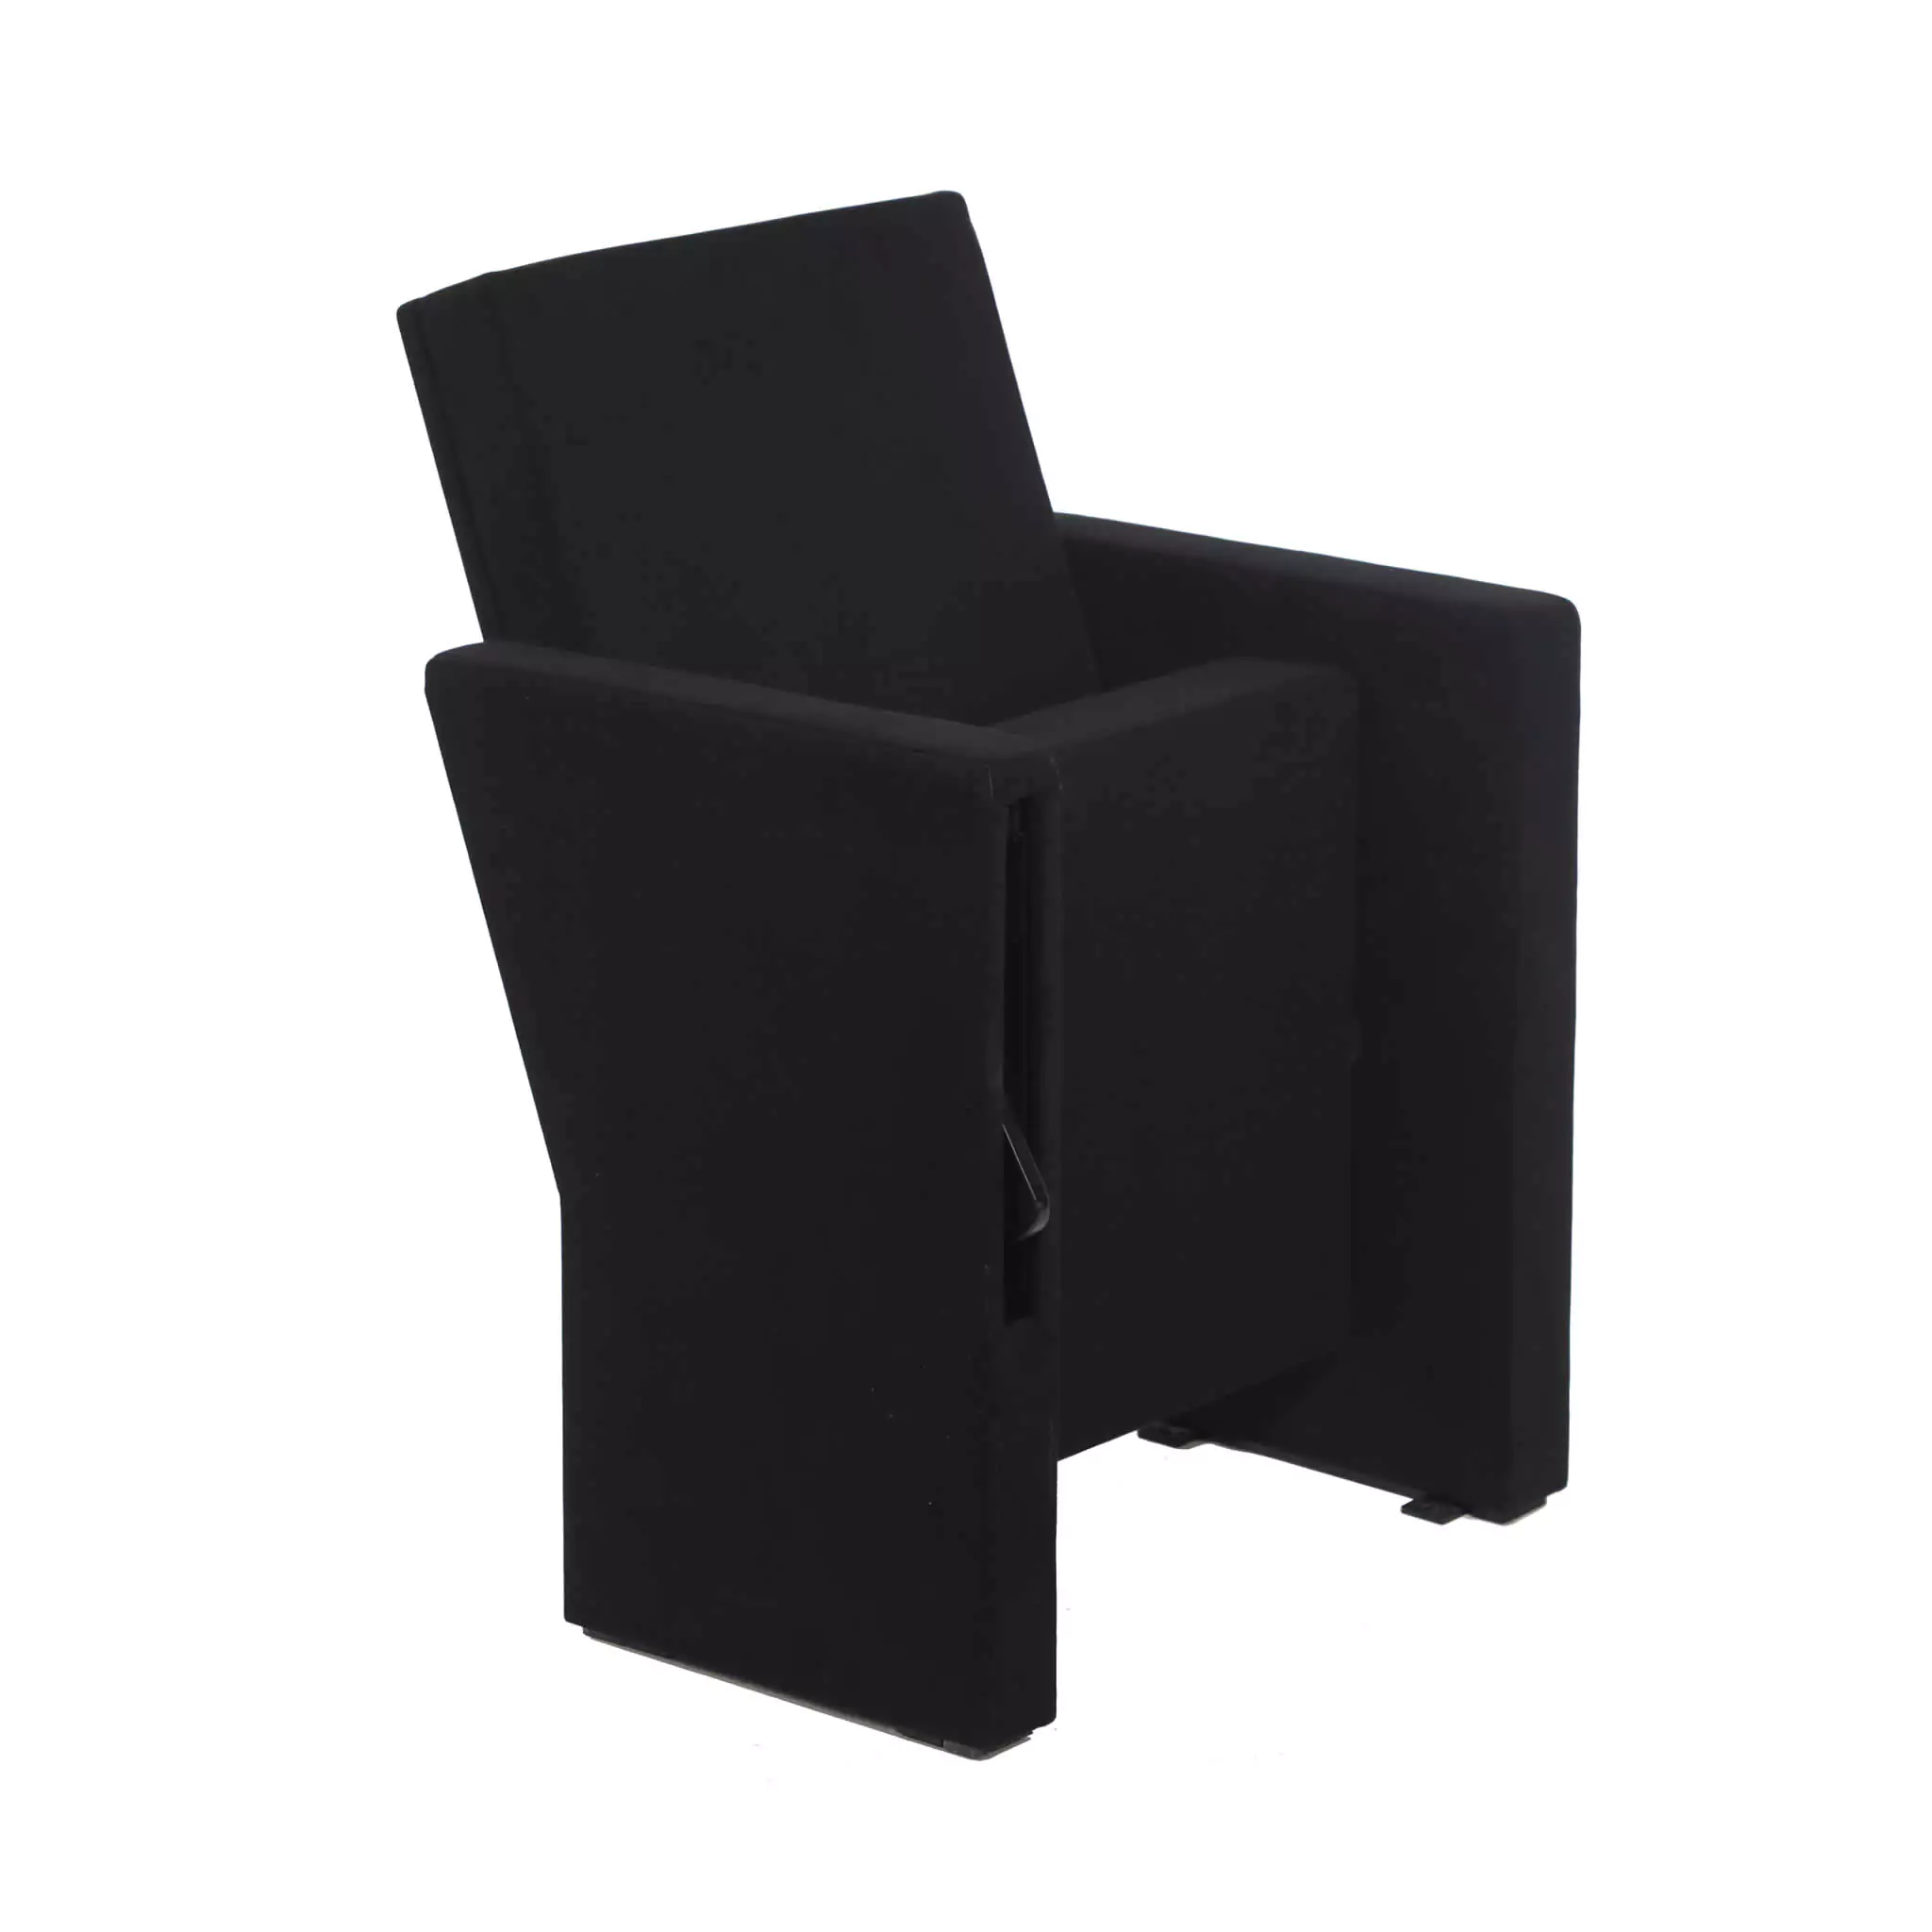 Simko Seating Products Conference Seat Kuvars AP